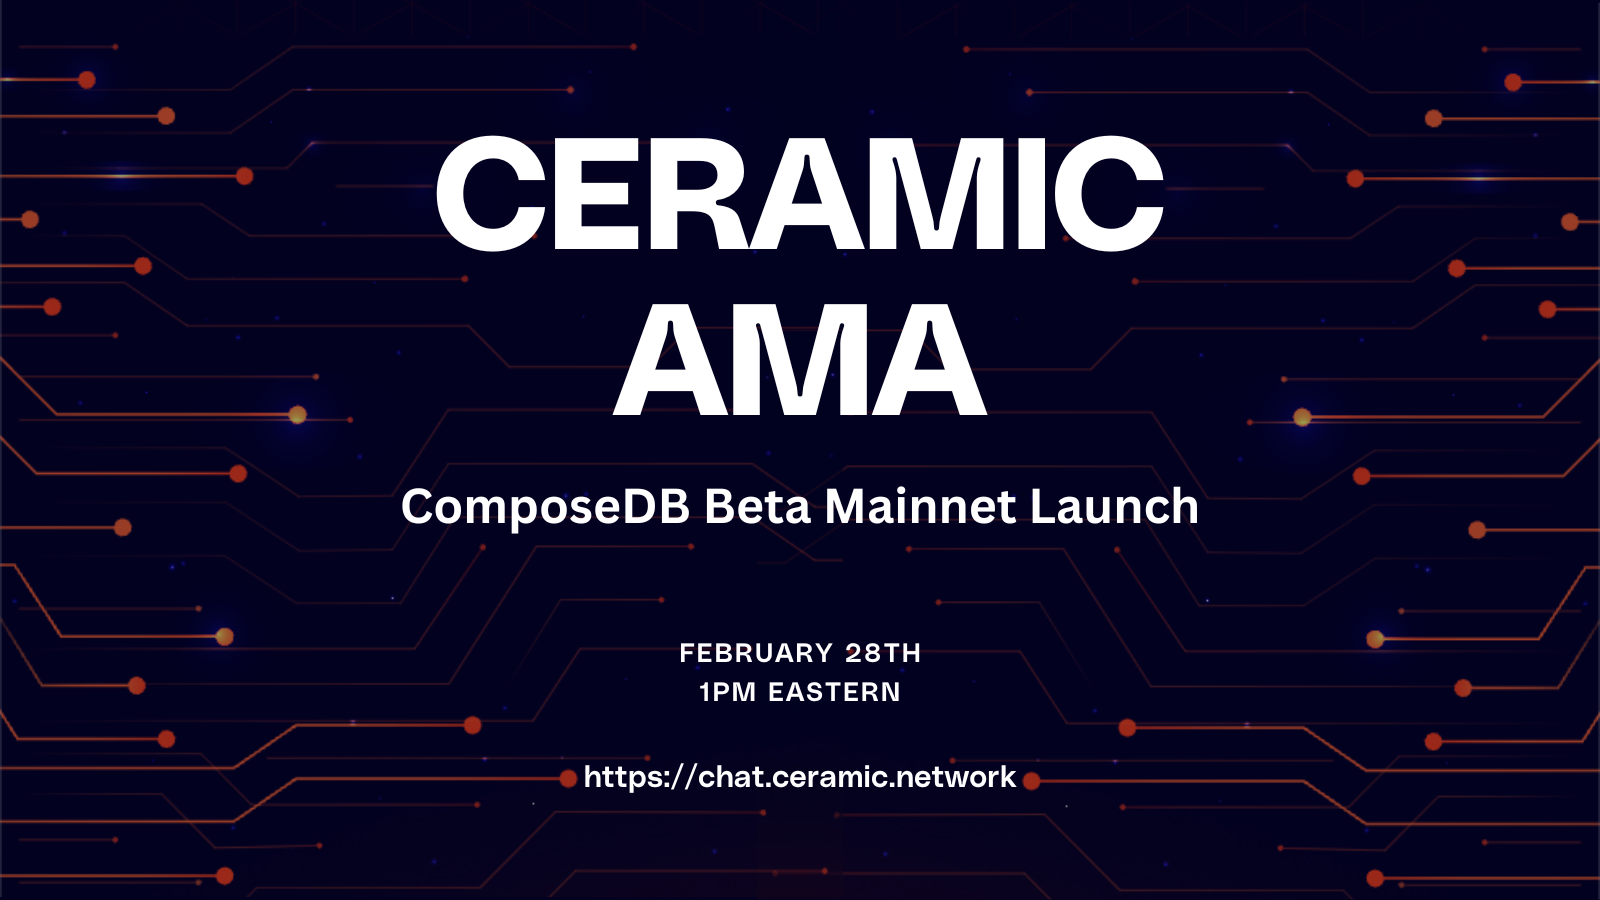 Join us for an AMA on ComposeDB and Ceramic